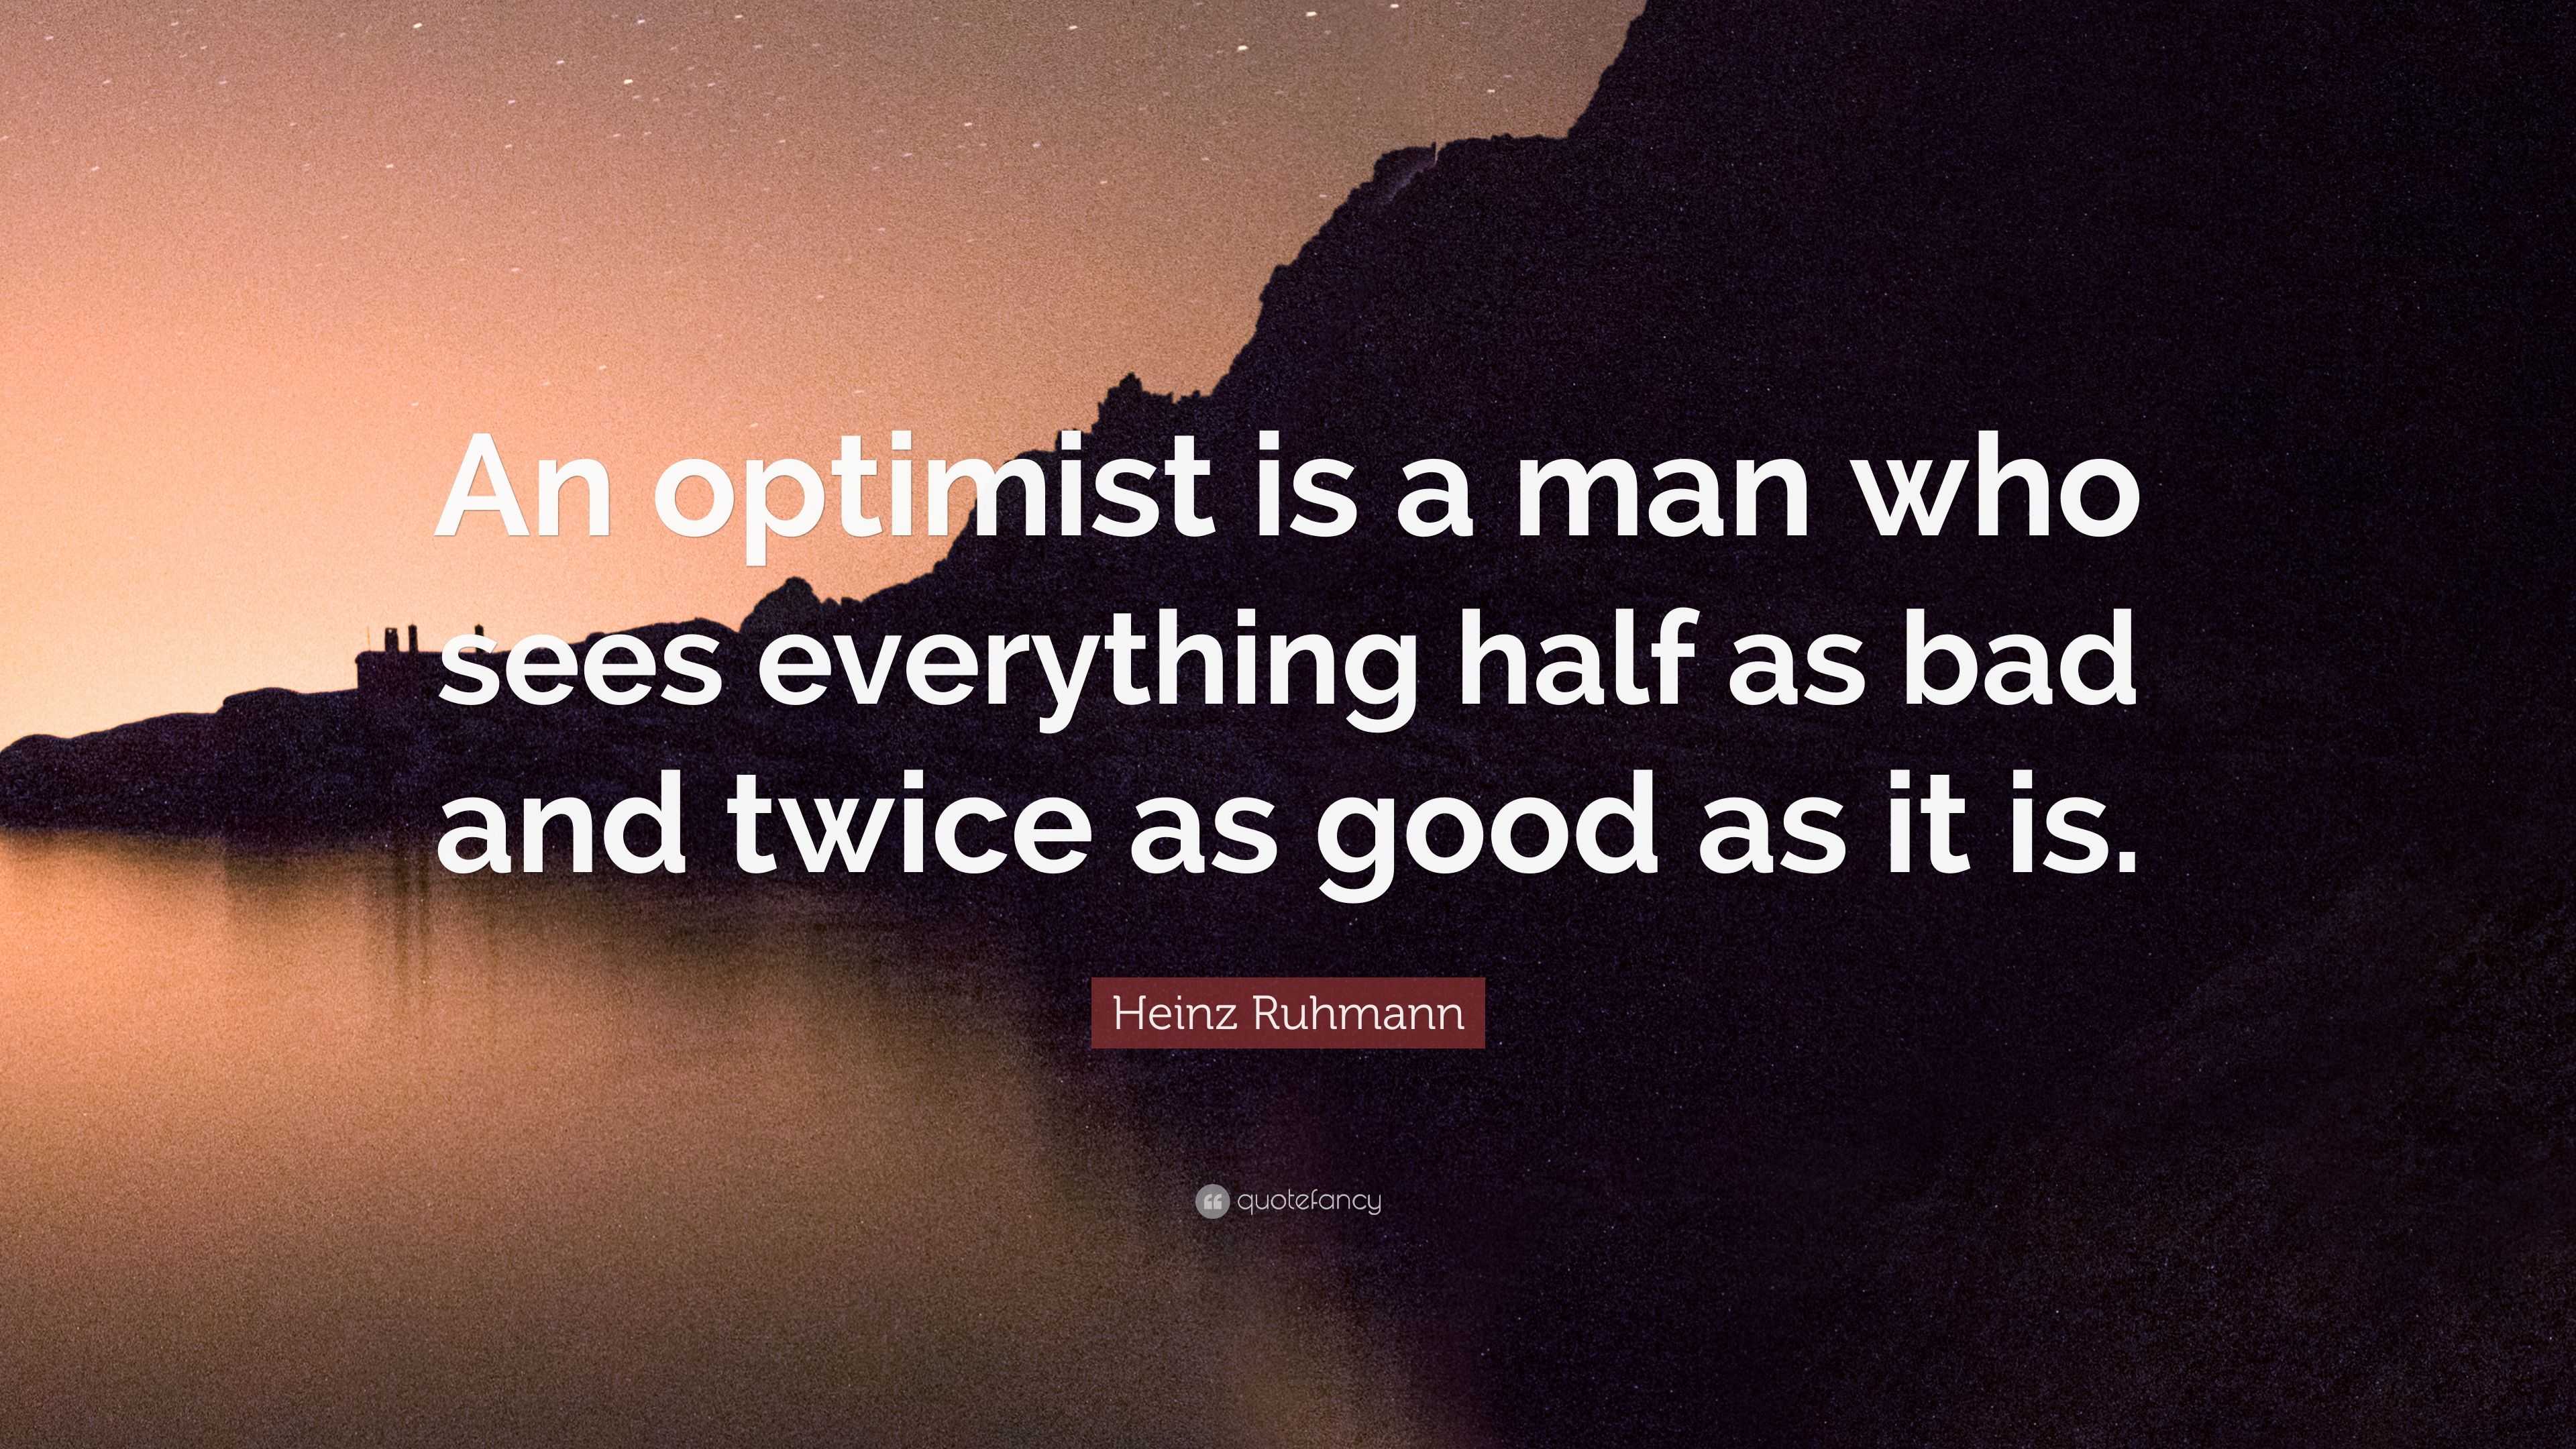 Heinz Ruhmann Quote: “An optimist is a man who sees everything half as ...